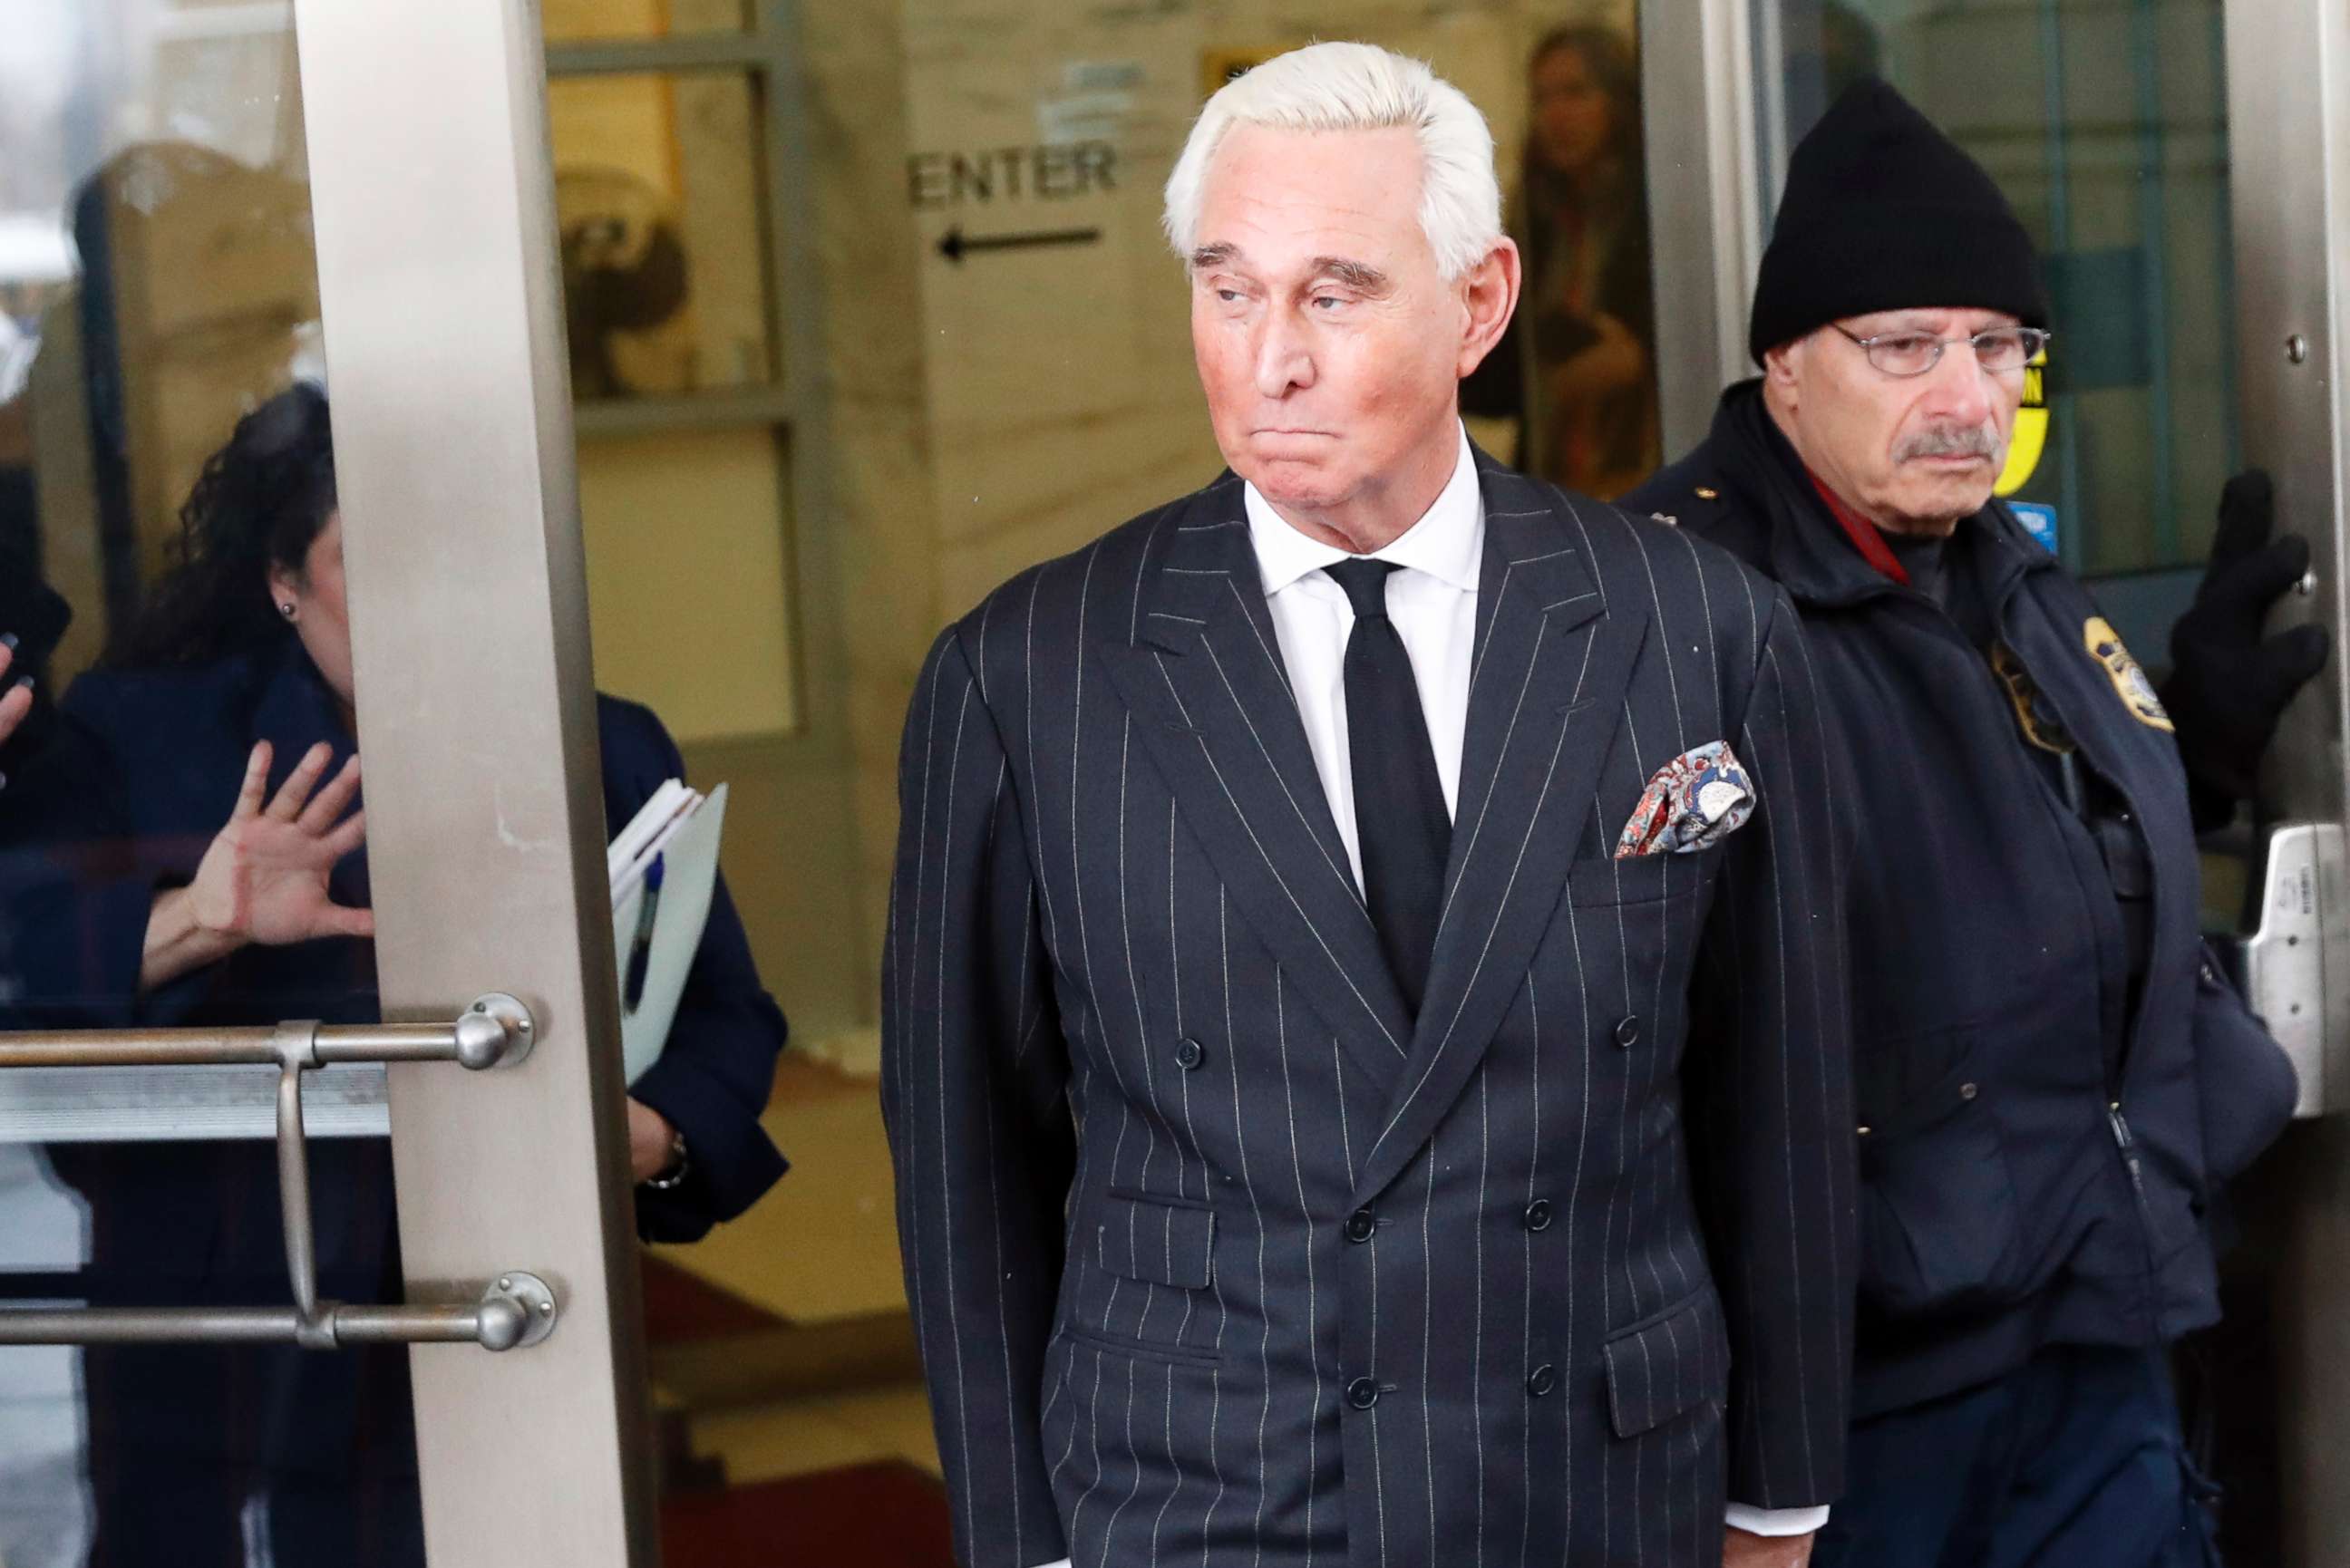 PHOTO: Former campaign adviser for President Donald Trump, Roger Stone, leaves federal court in Washington,D.C., Feb. 1, 2019. 